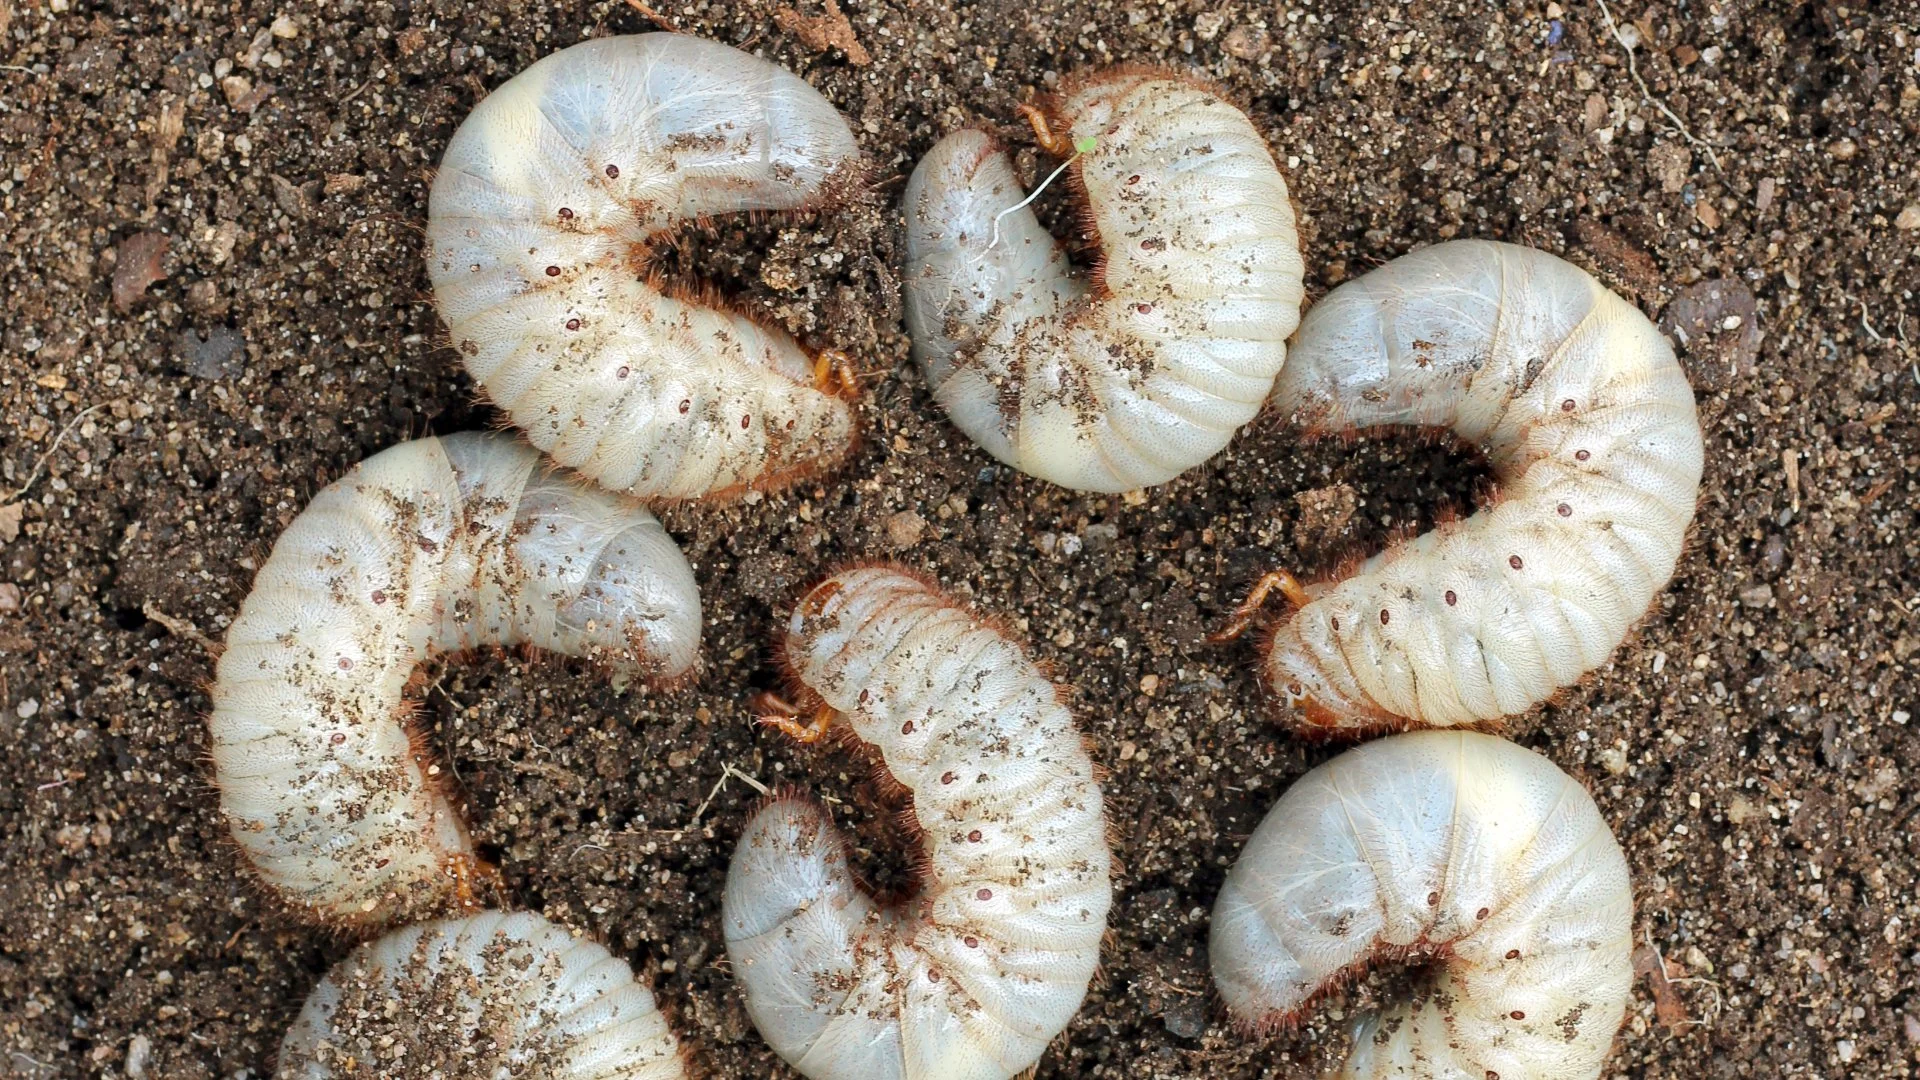 How Can I Keep Grubs From Infesting My Lawn?